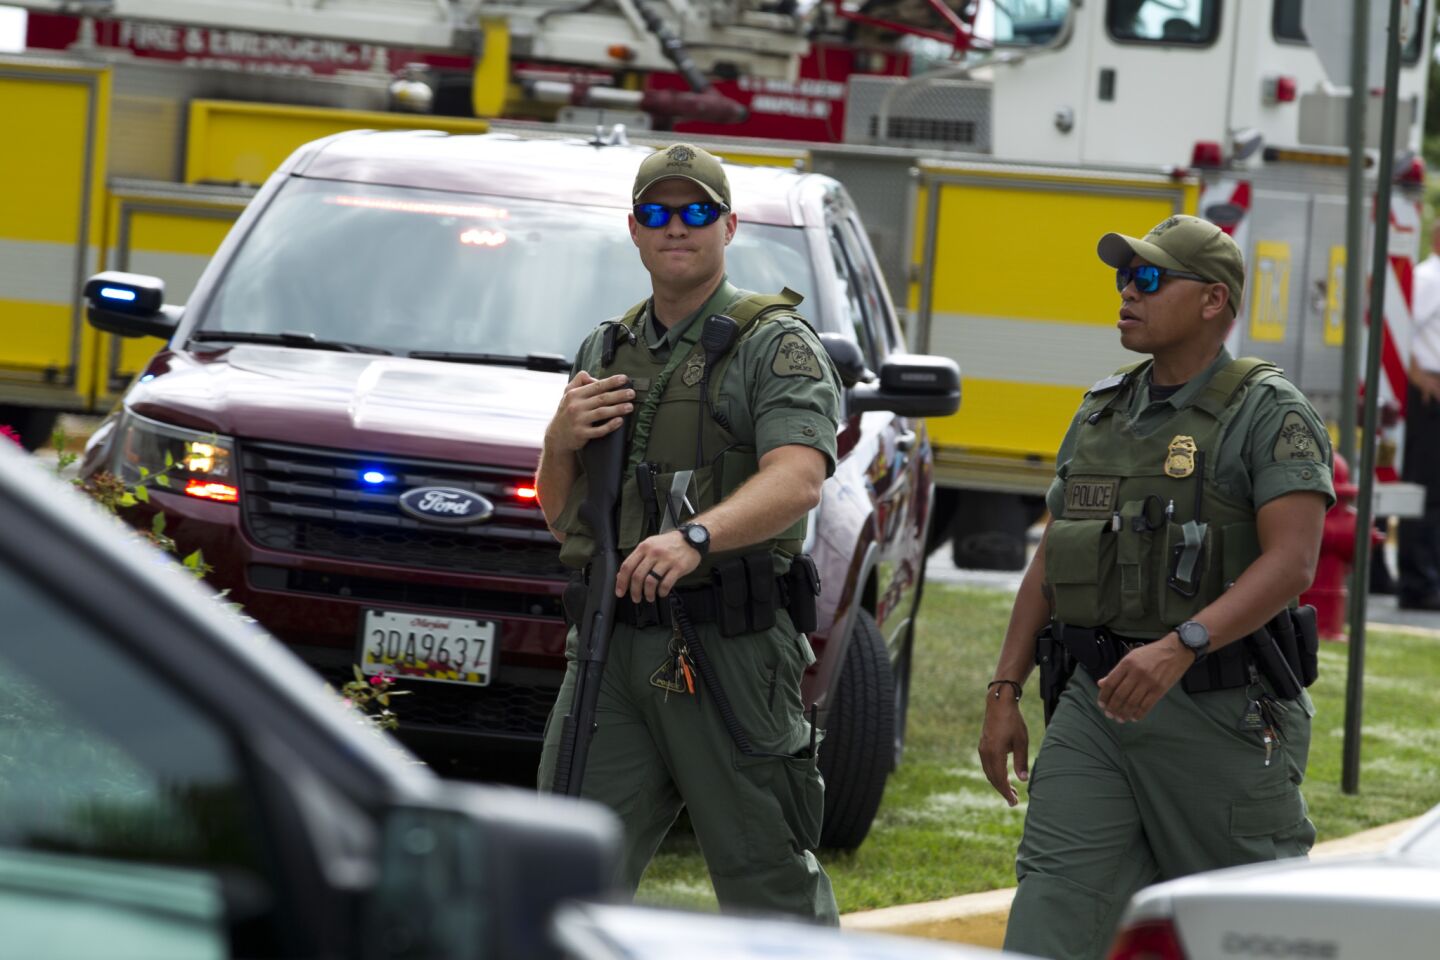 Maryland state police officers patrol the area near the scene of a shooting at the Capital newspaper.